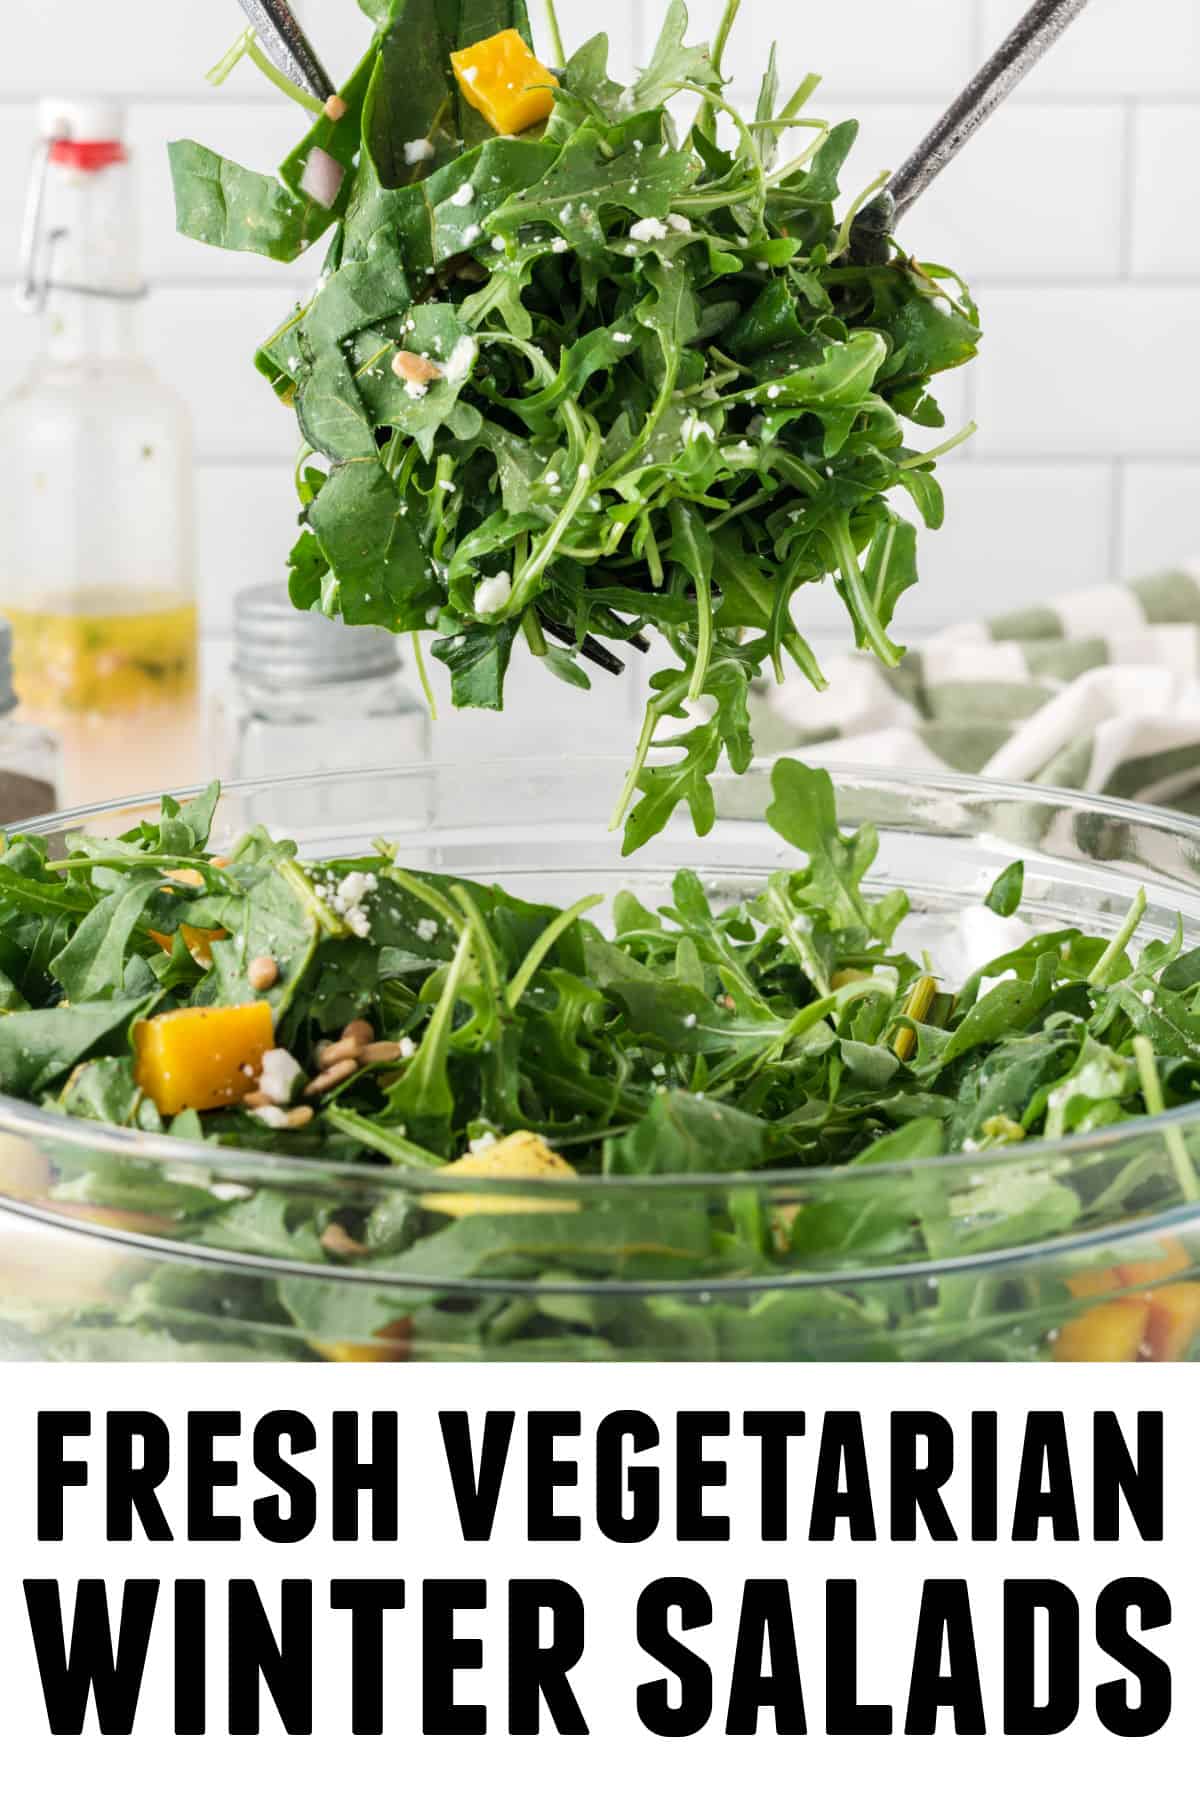 A photo of a scoop of arugula salad with text on the bottom that says, "fresh vegetarian winter salads."